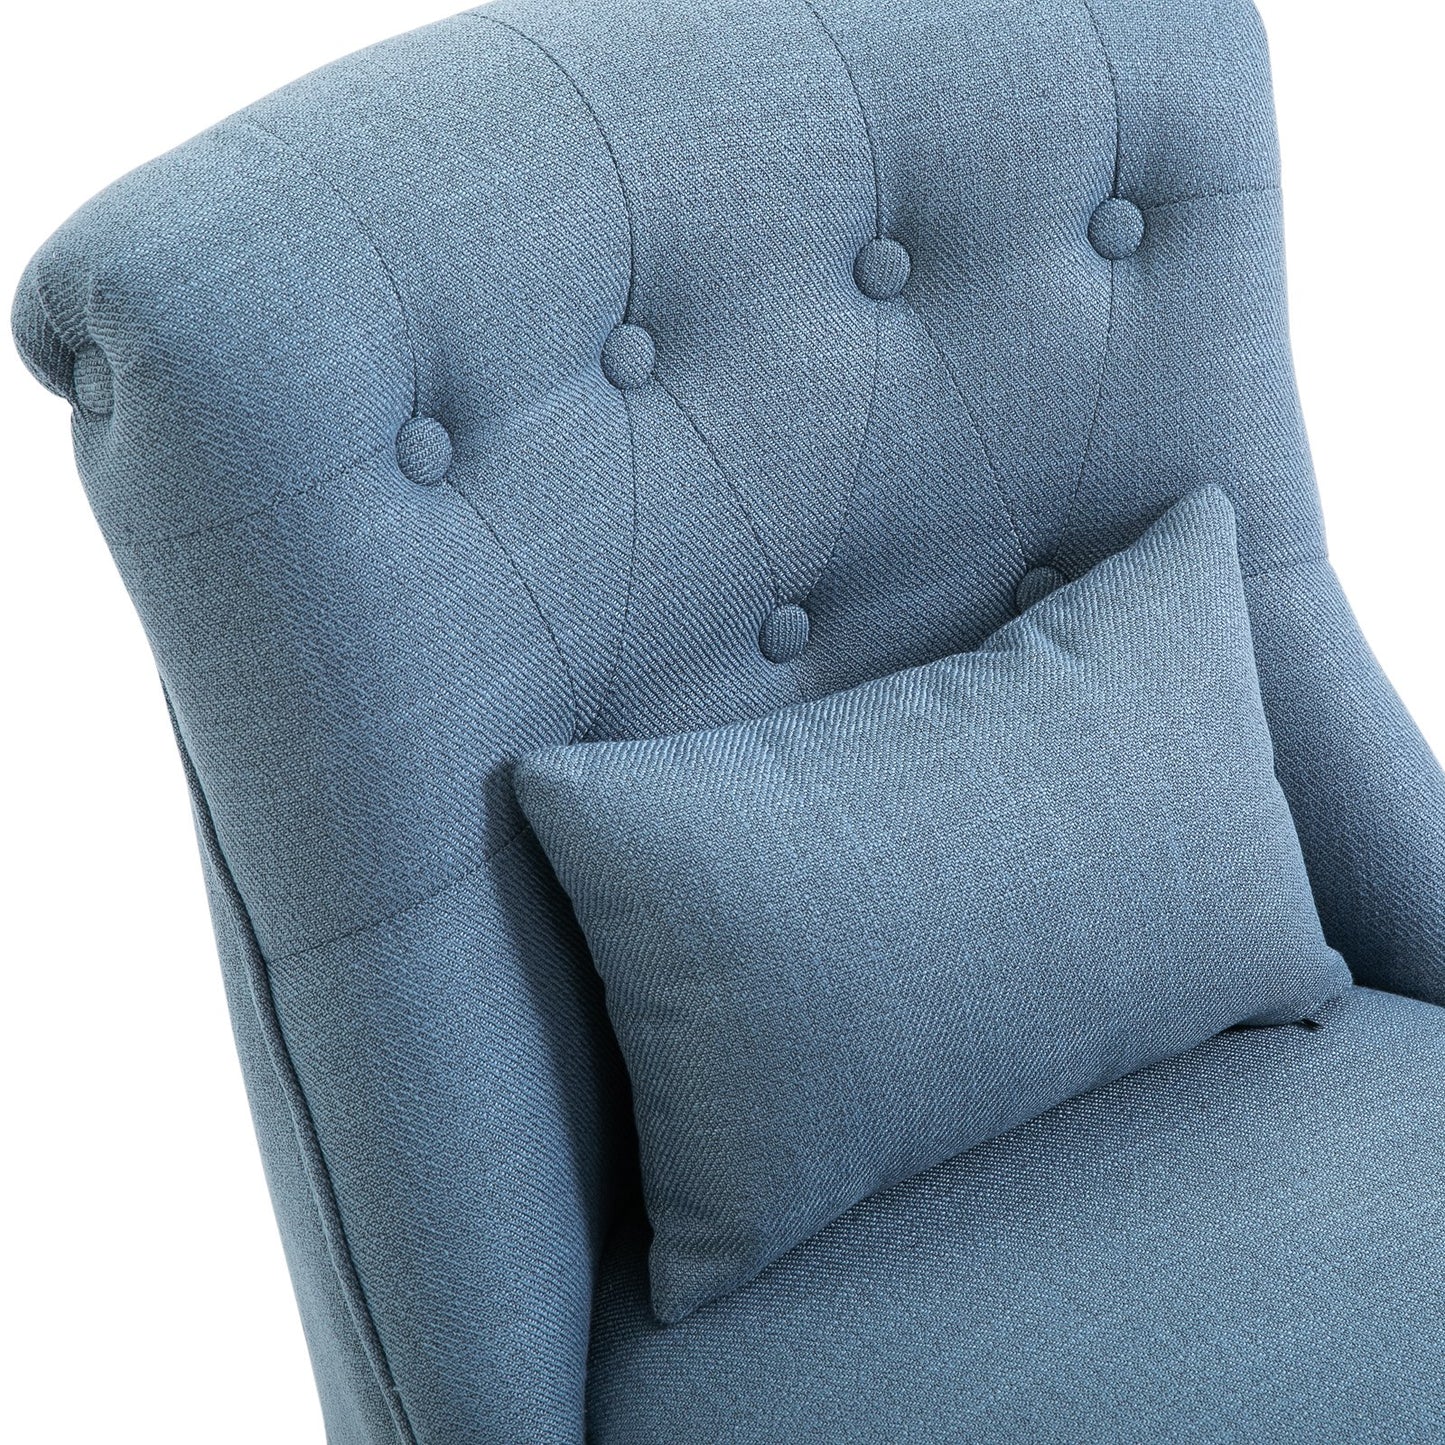 HOMCOM Solid Rubber Wood Tufted Single Sofa Chair w/ Pillow Blue